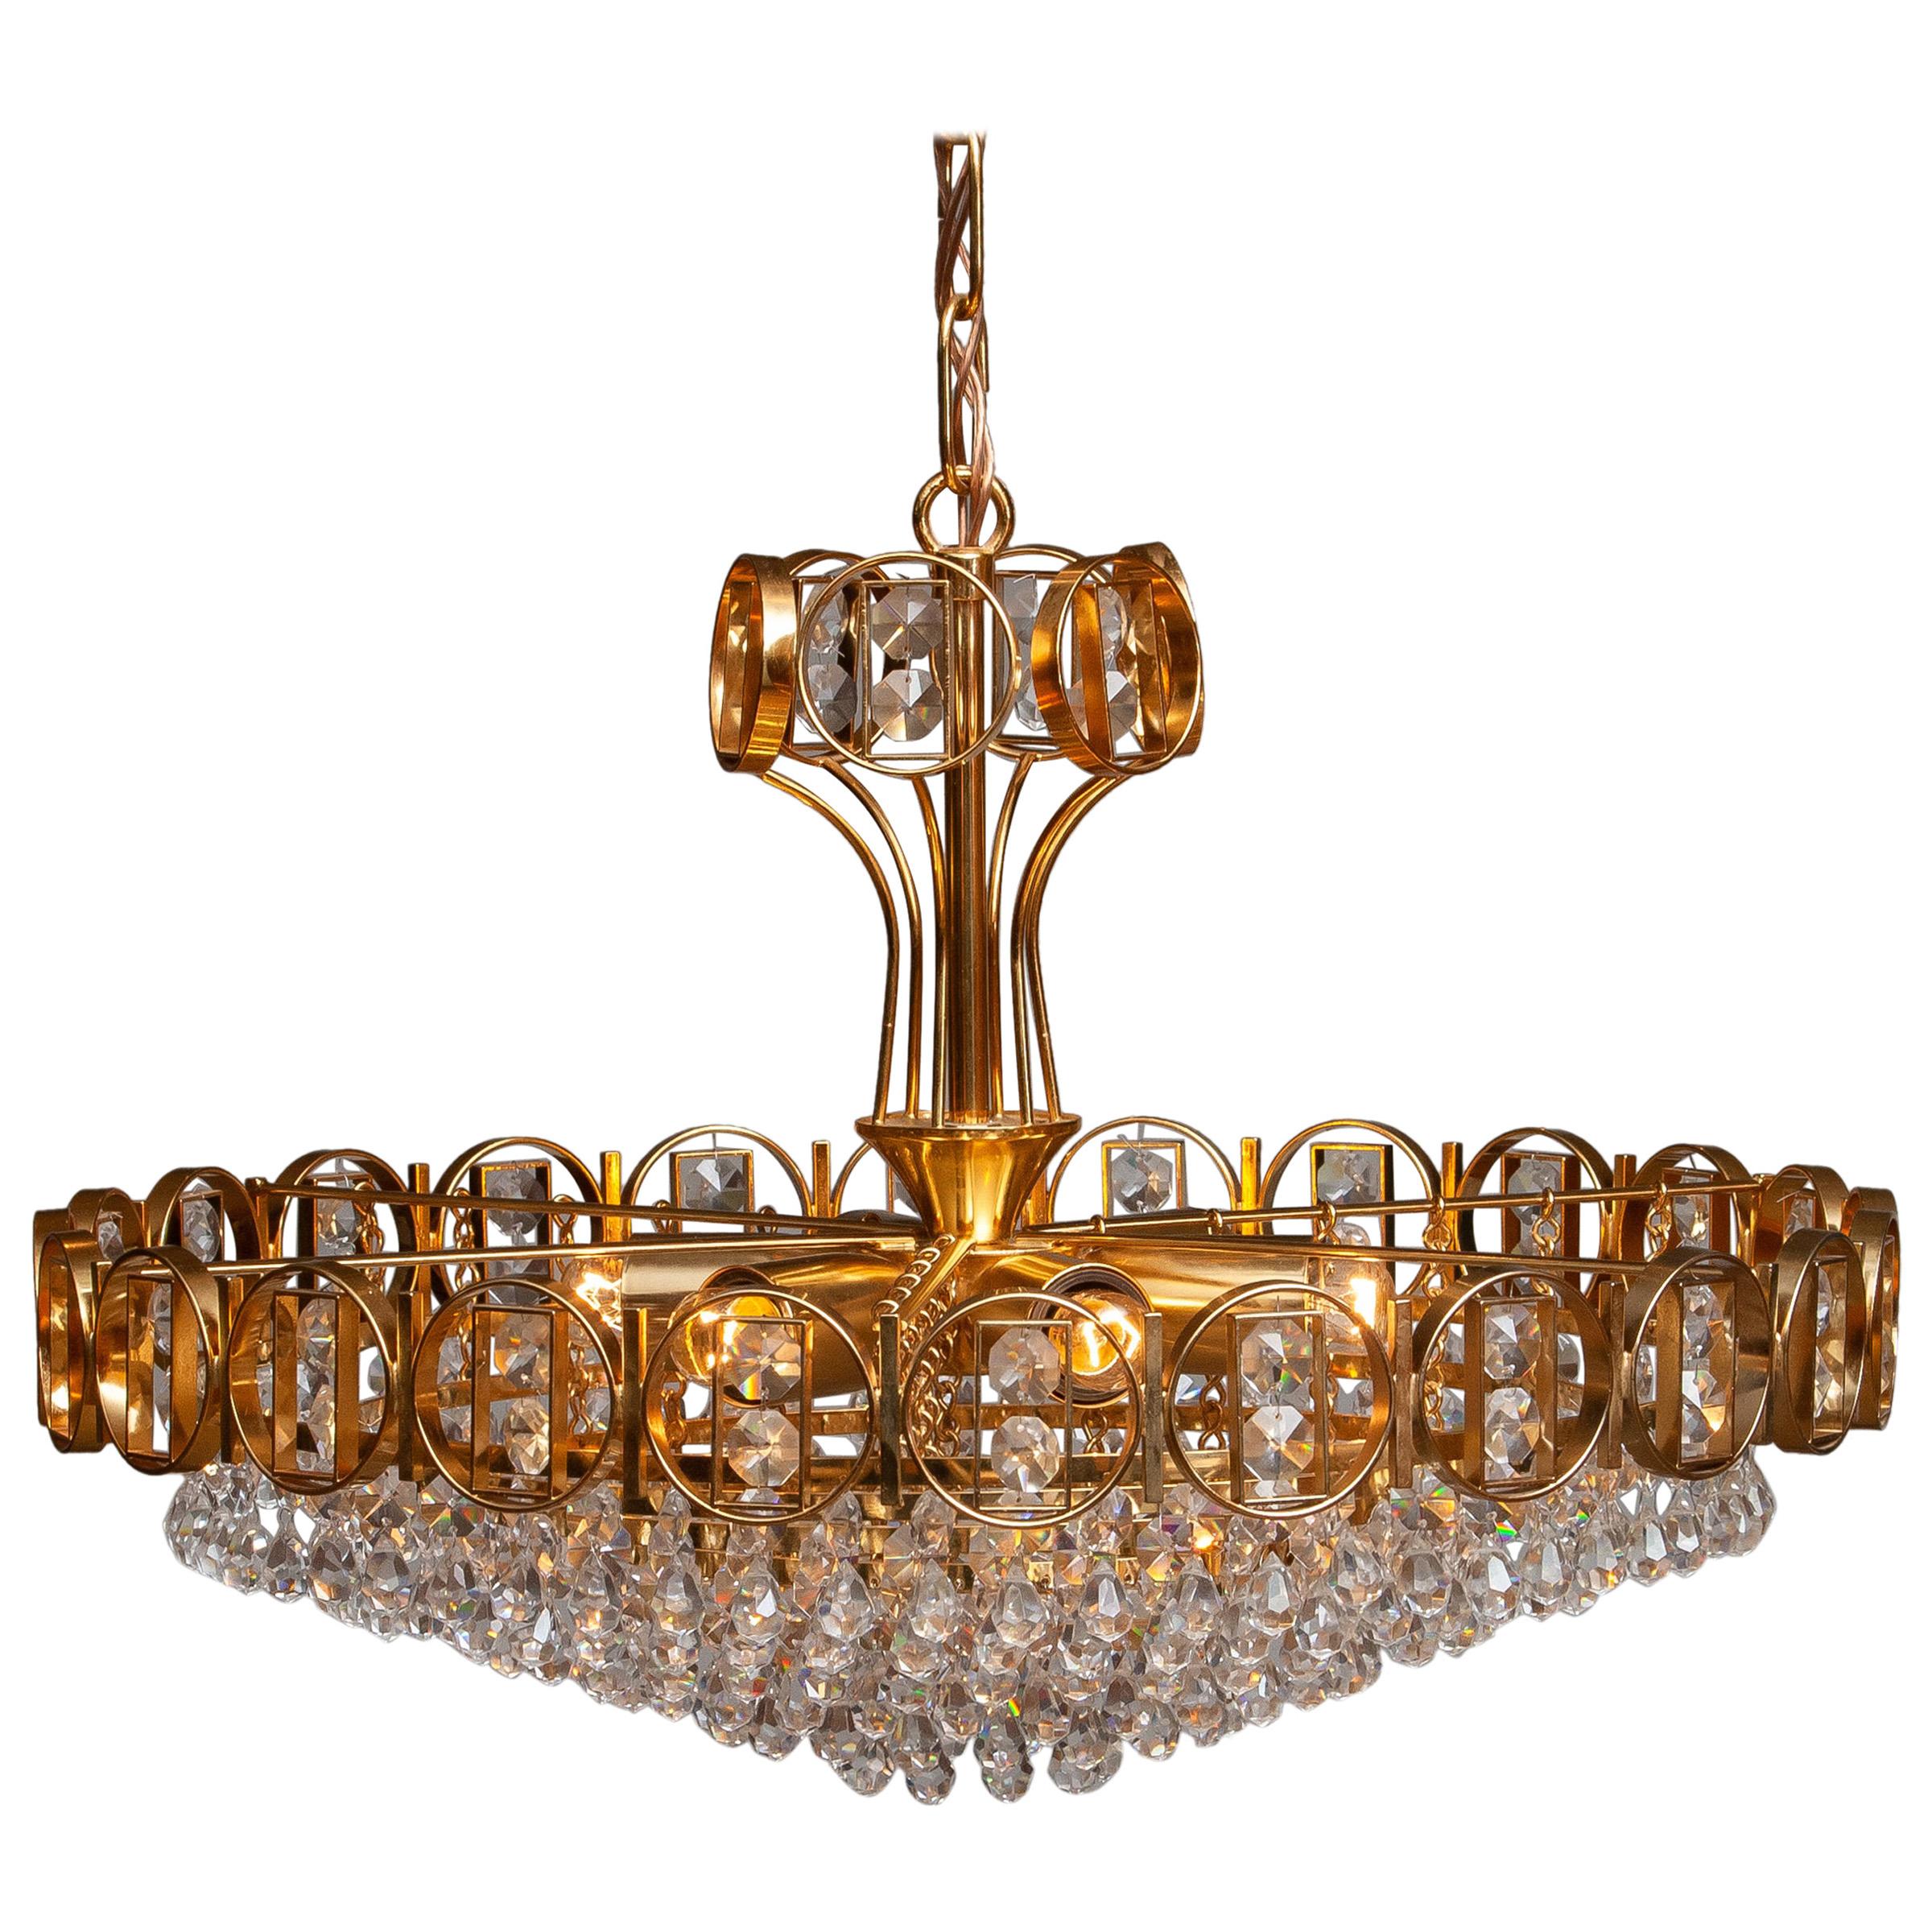 1970s, Gold Plated Brass Chandelier with Faceted Crystals Made by Palwa Germany